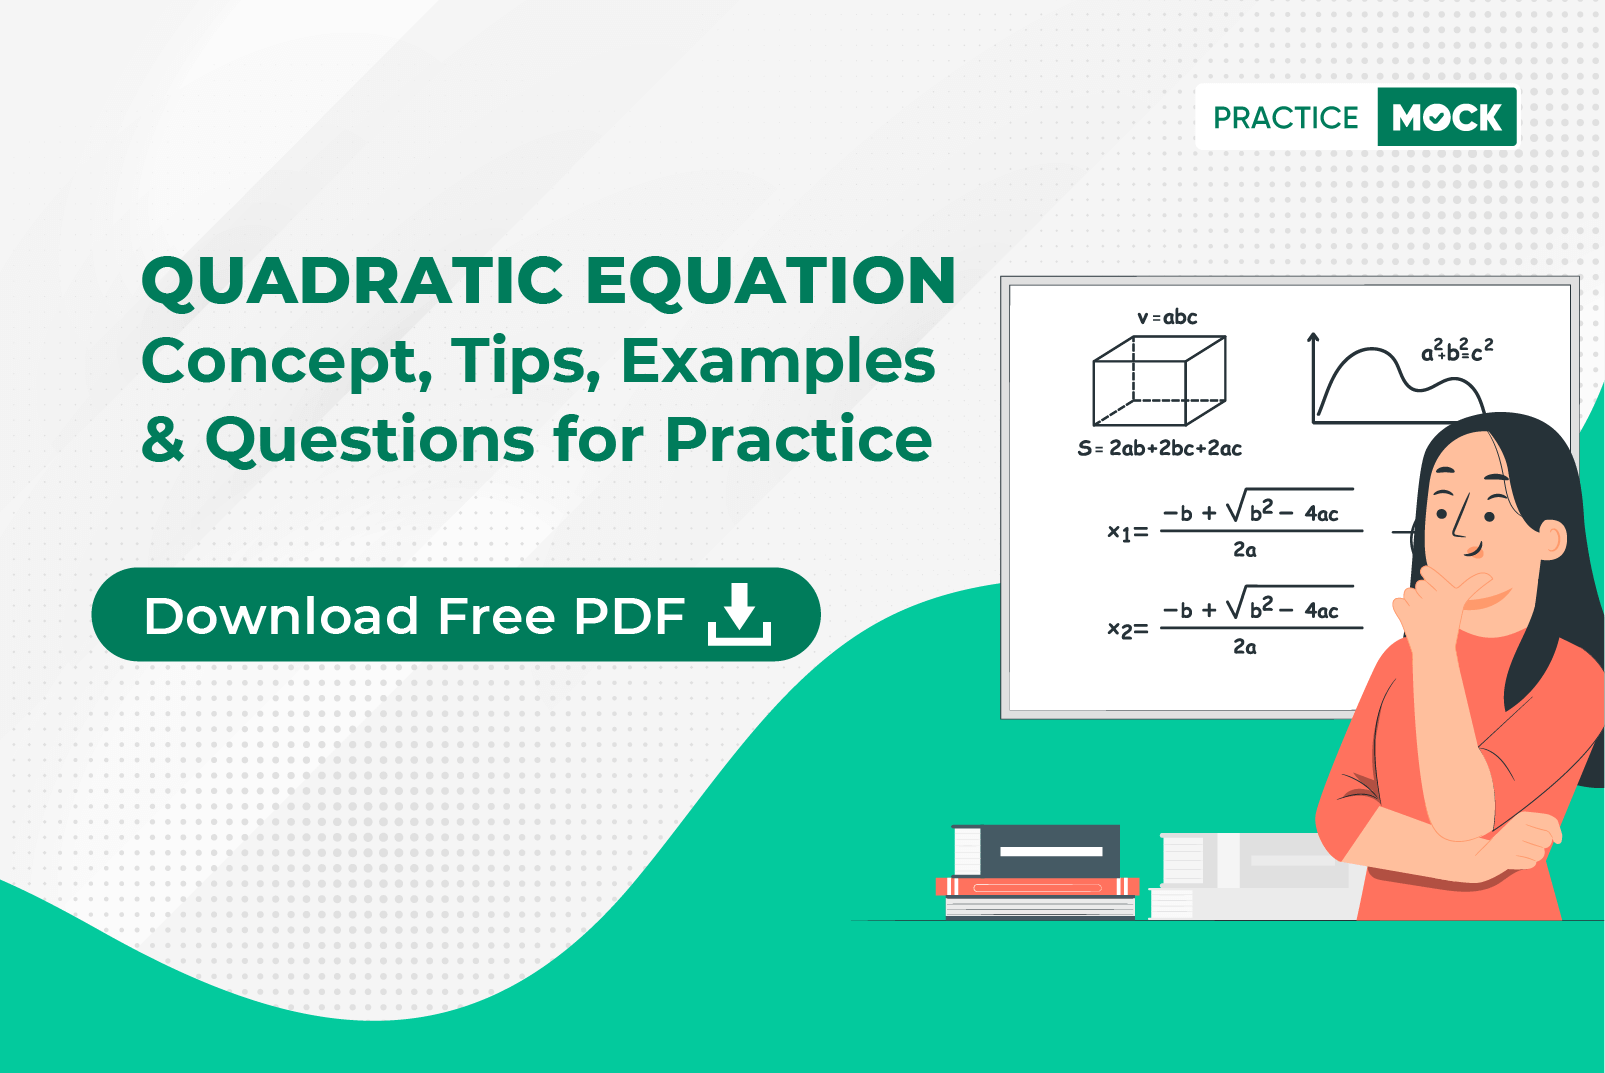 Quadratic Equation- Concept, Tips, Examples & Questions for Practice- Download PDF